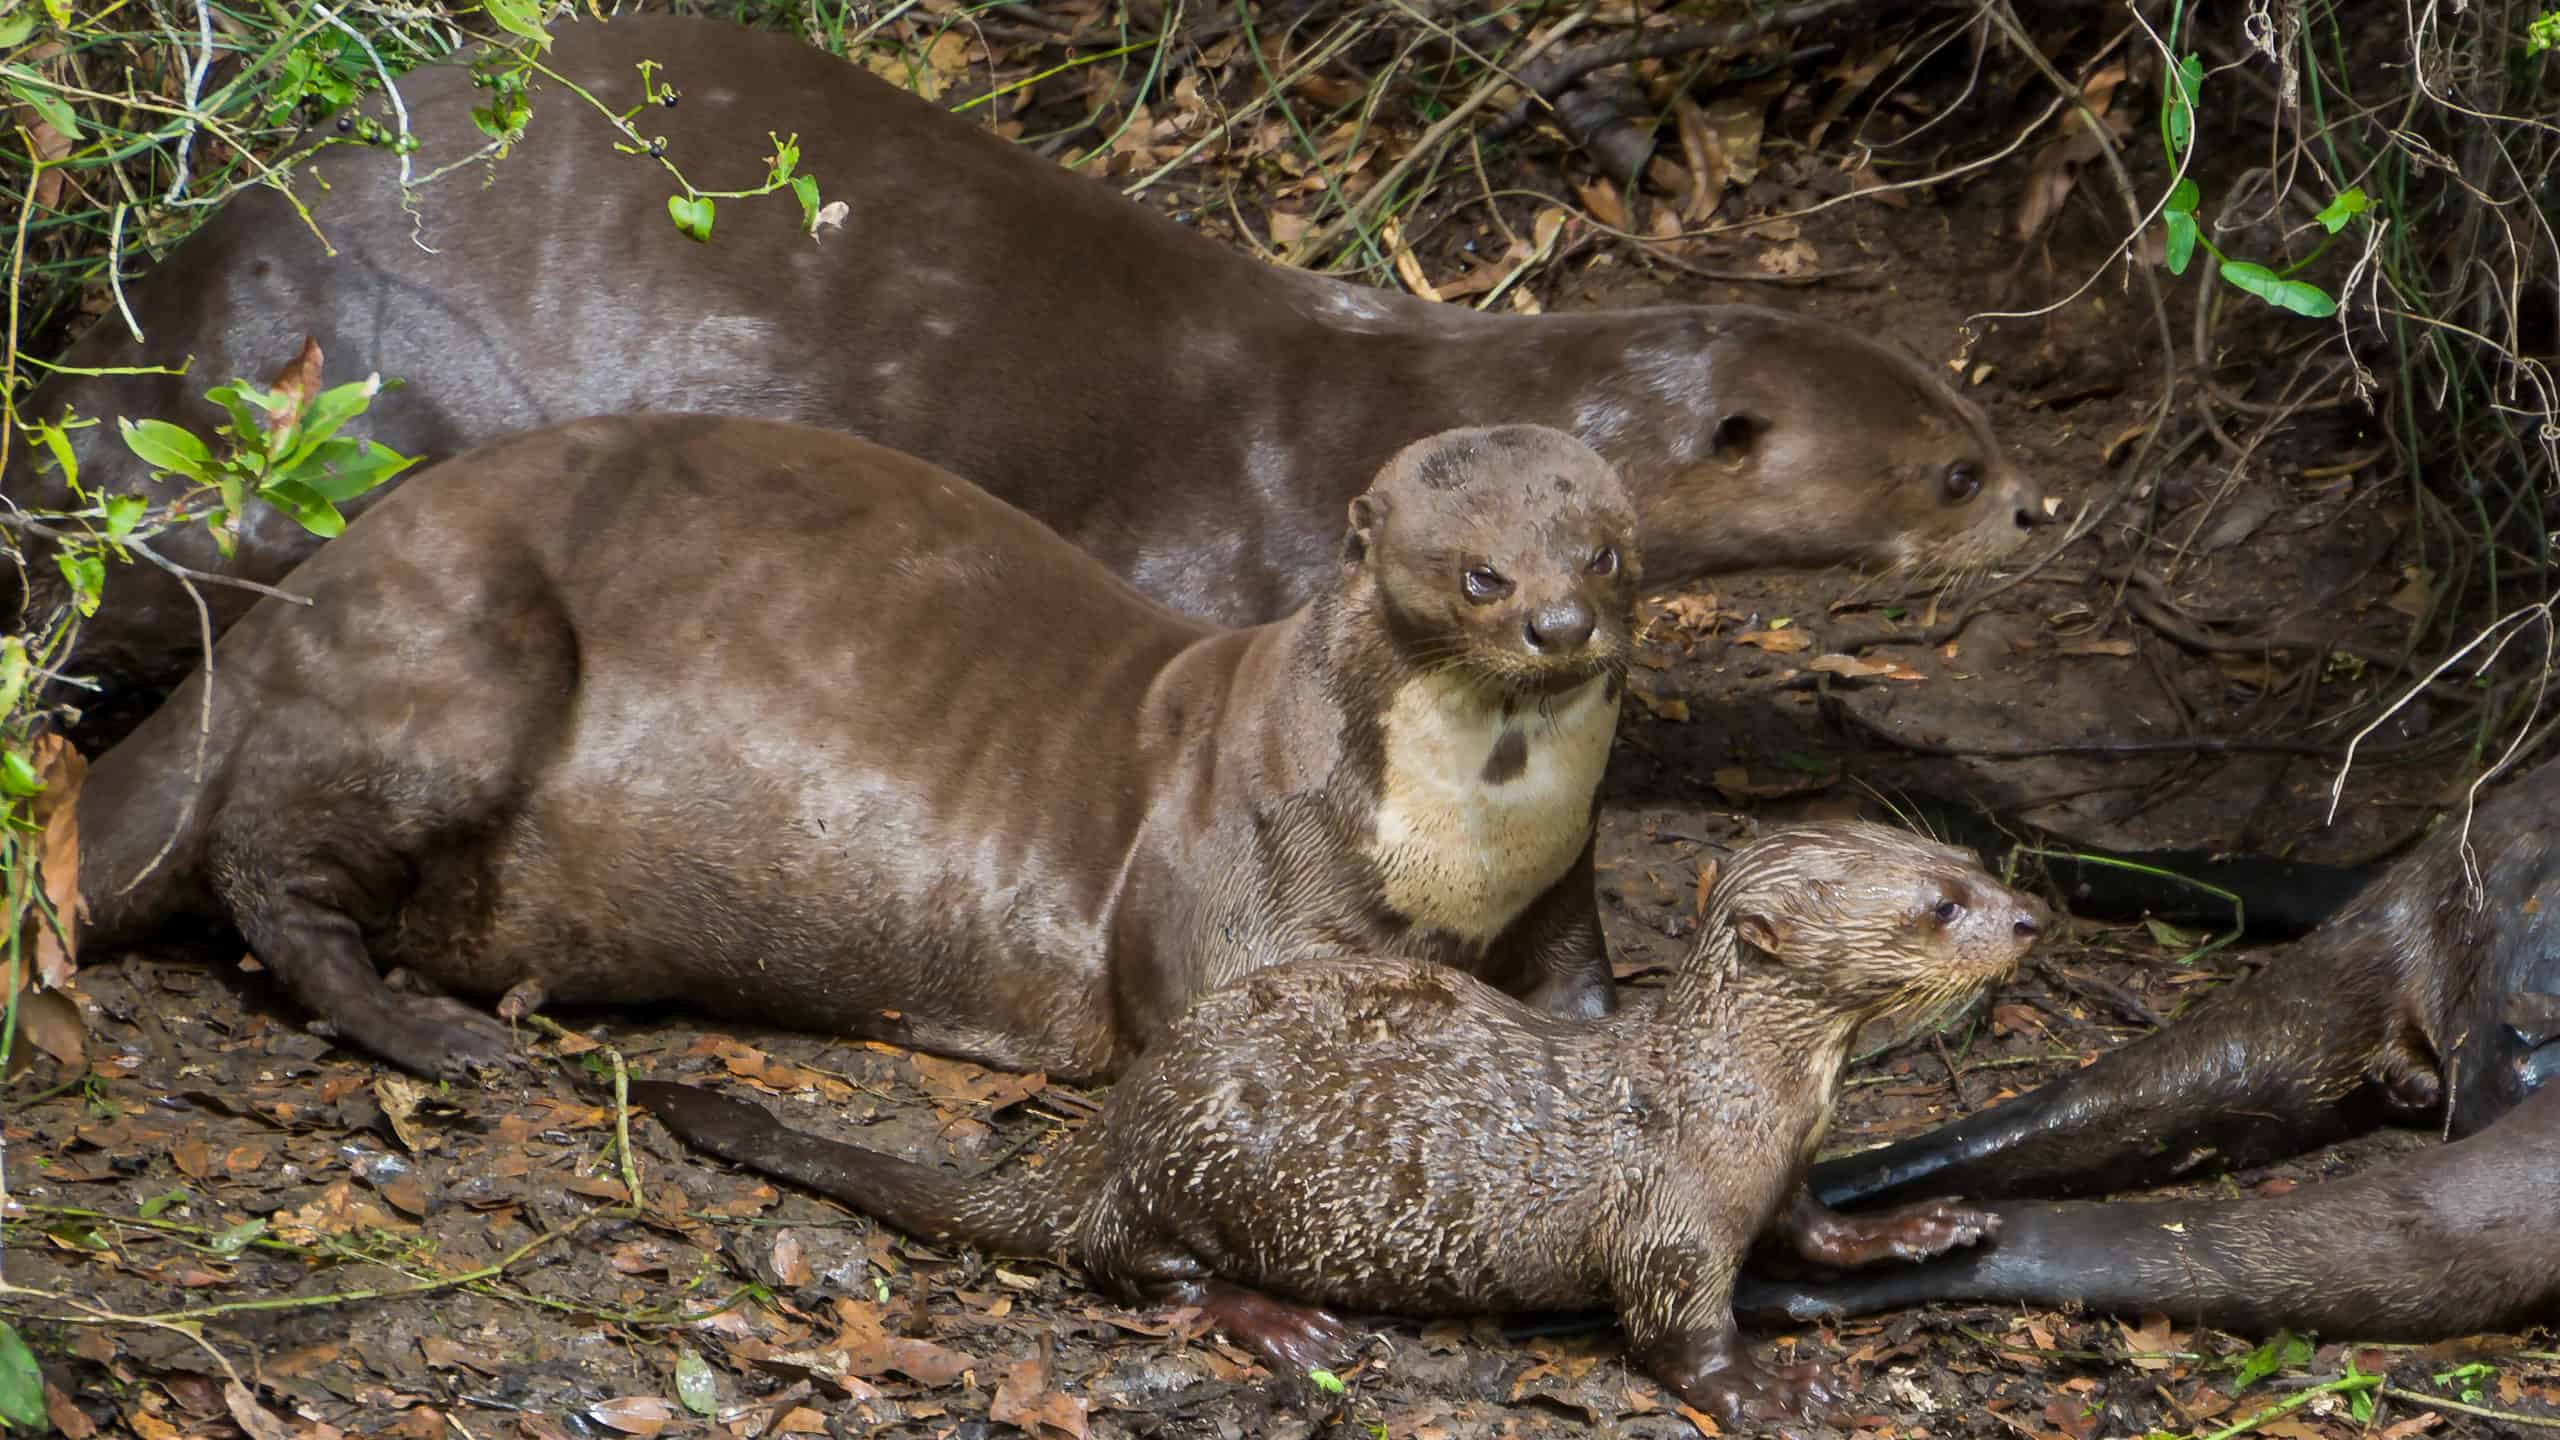 Family of otters in the Brazilian Pantanal